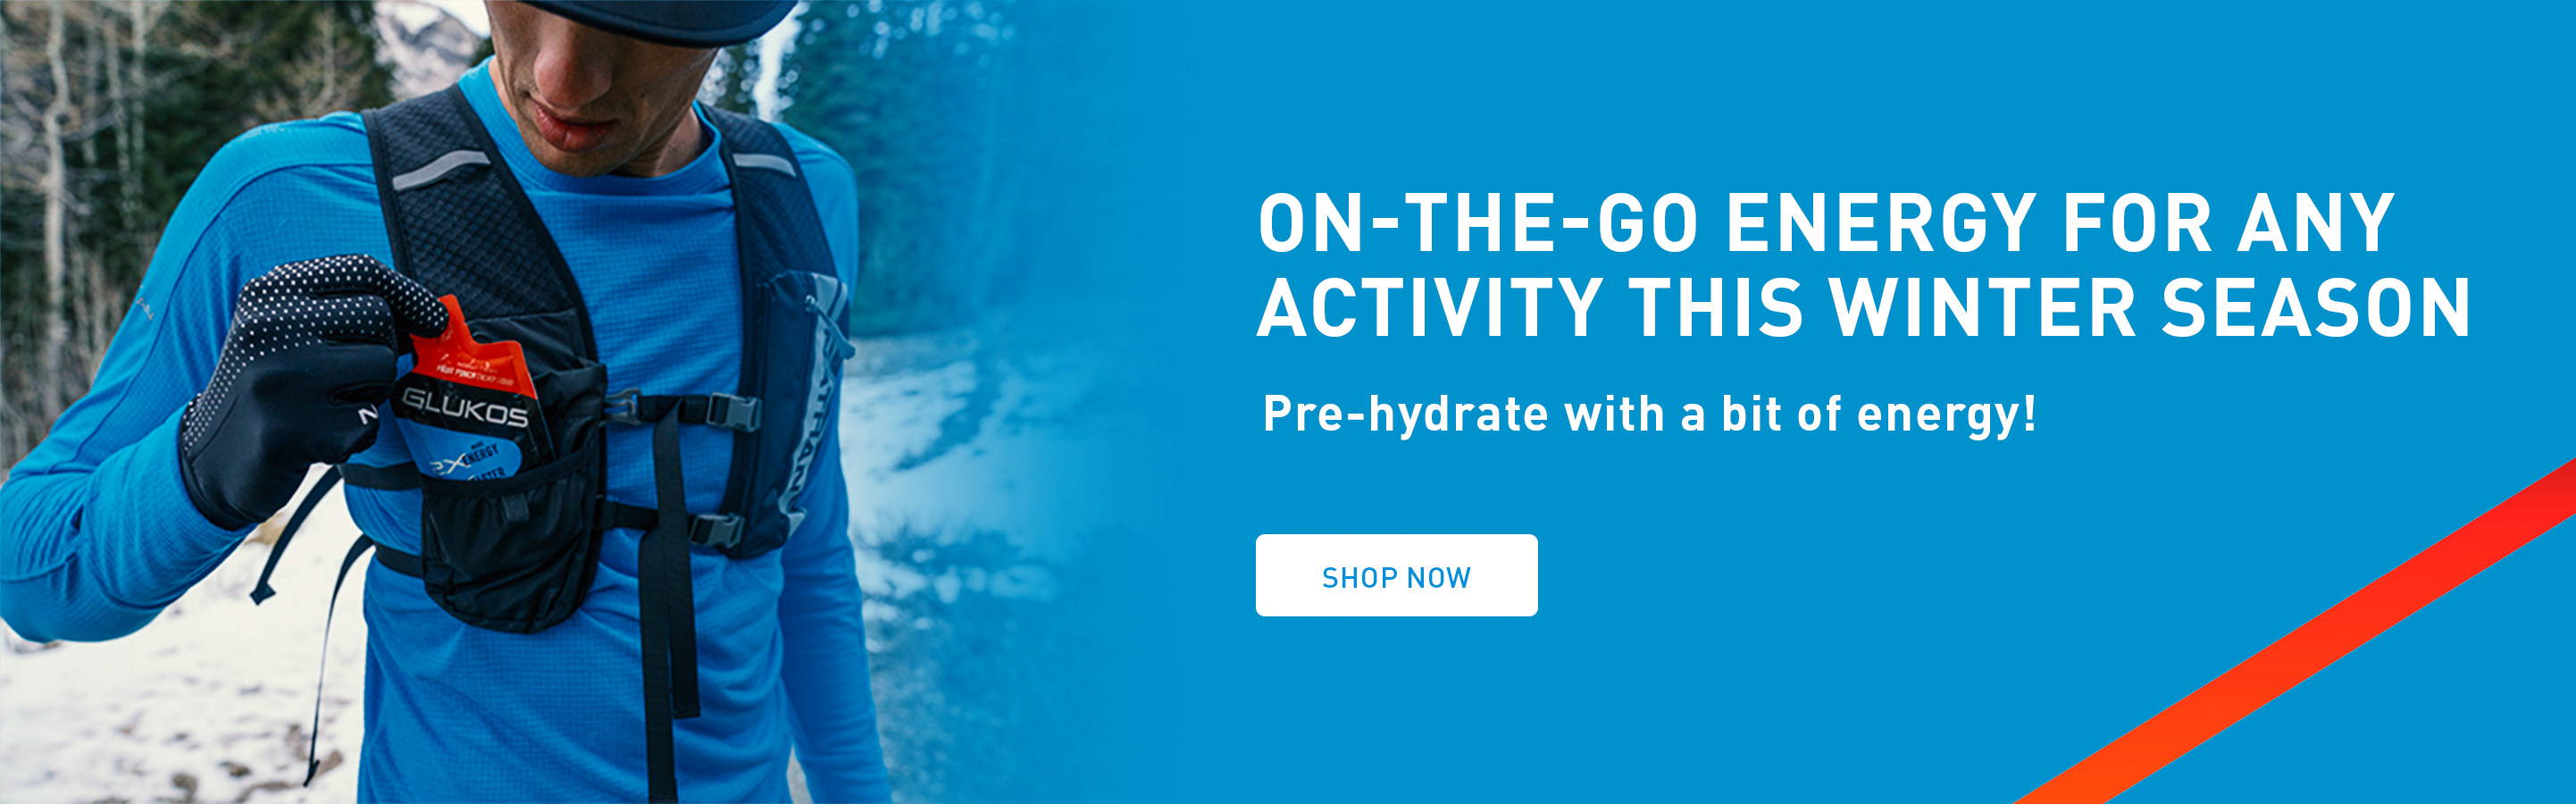 On-the-go energy for any activity this winter season. Pre-hydrate with a bit of energy! SHOP NOW